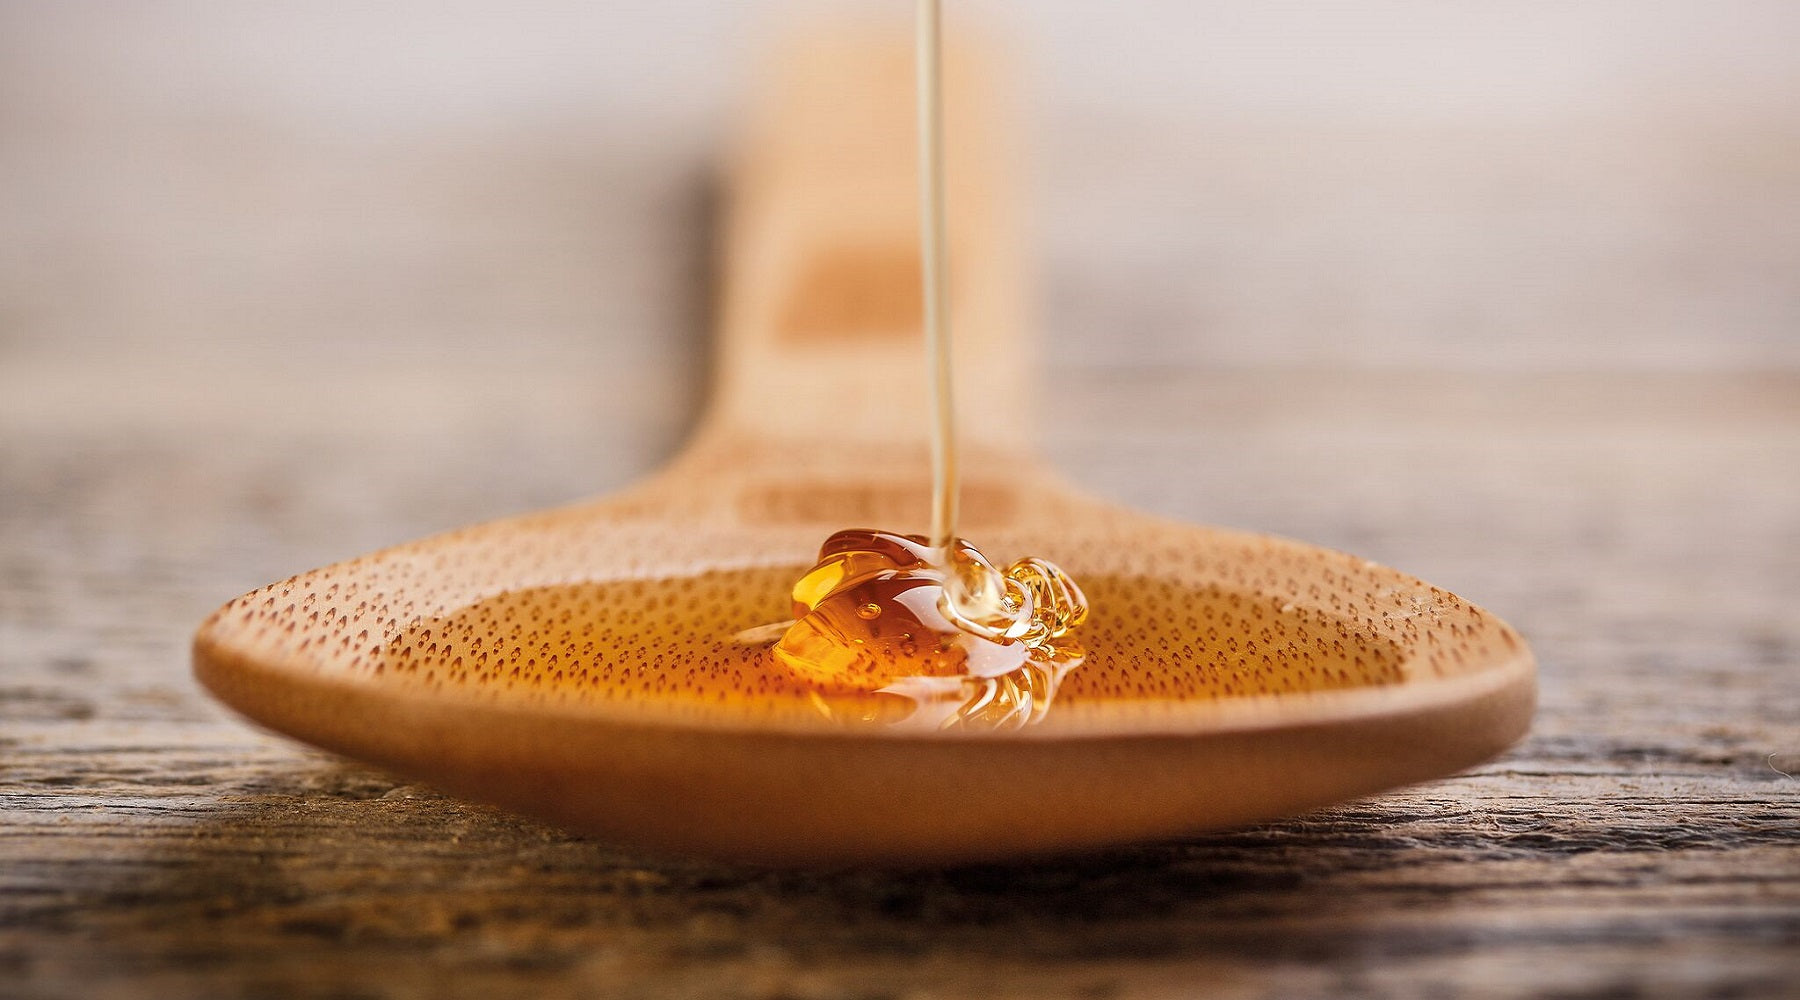 Special Manuka Honey Dripping onto a Wooden Spoon